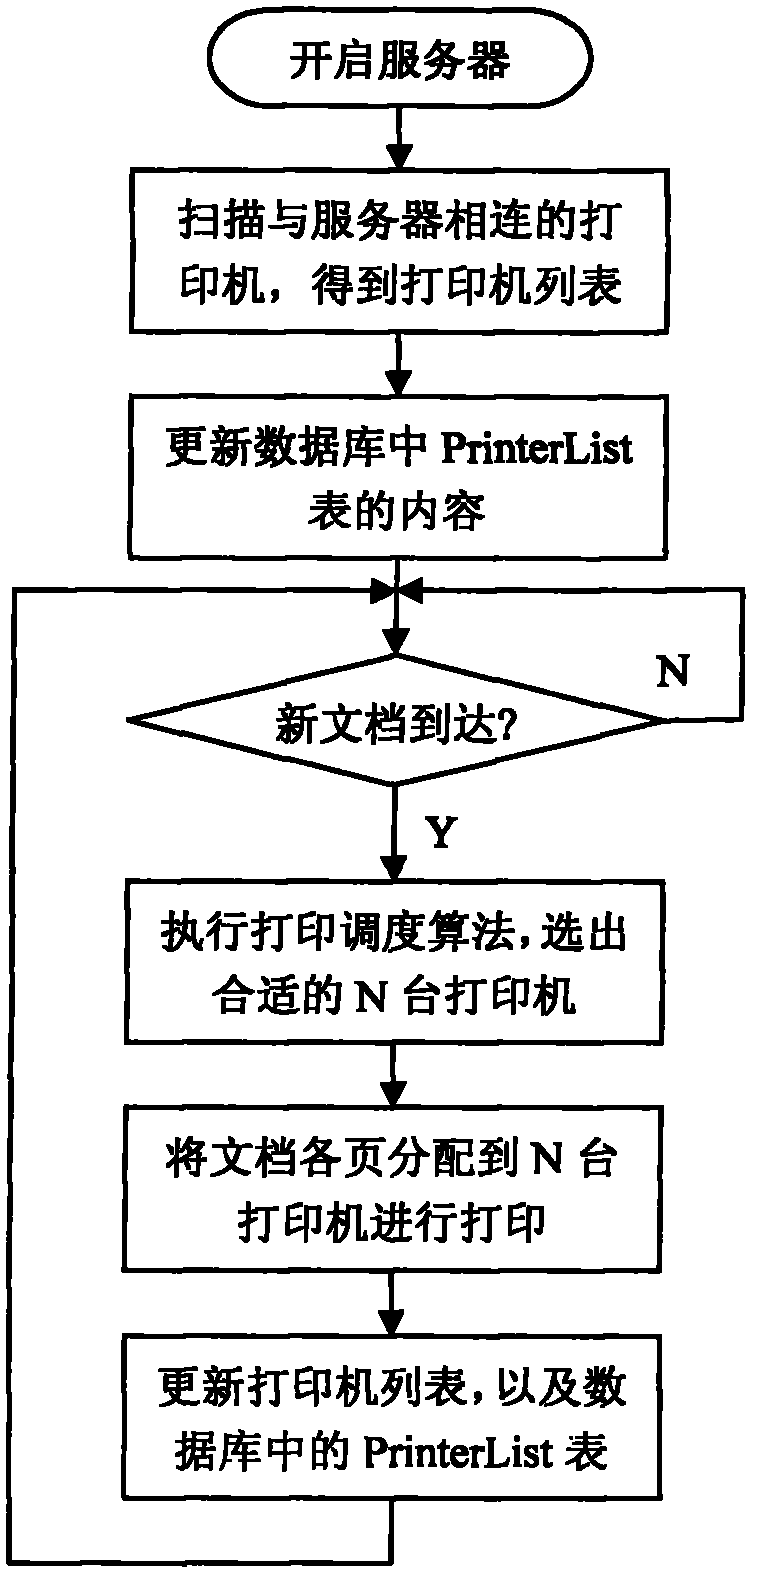 Novel method and system for parallel printing dispatching